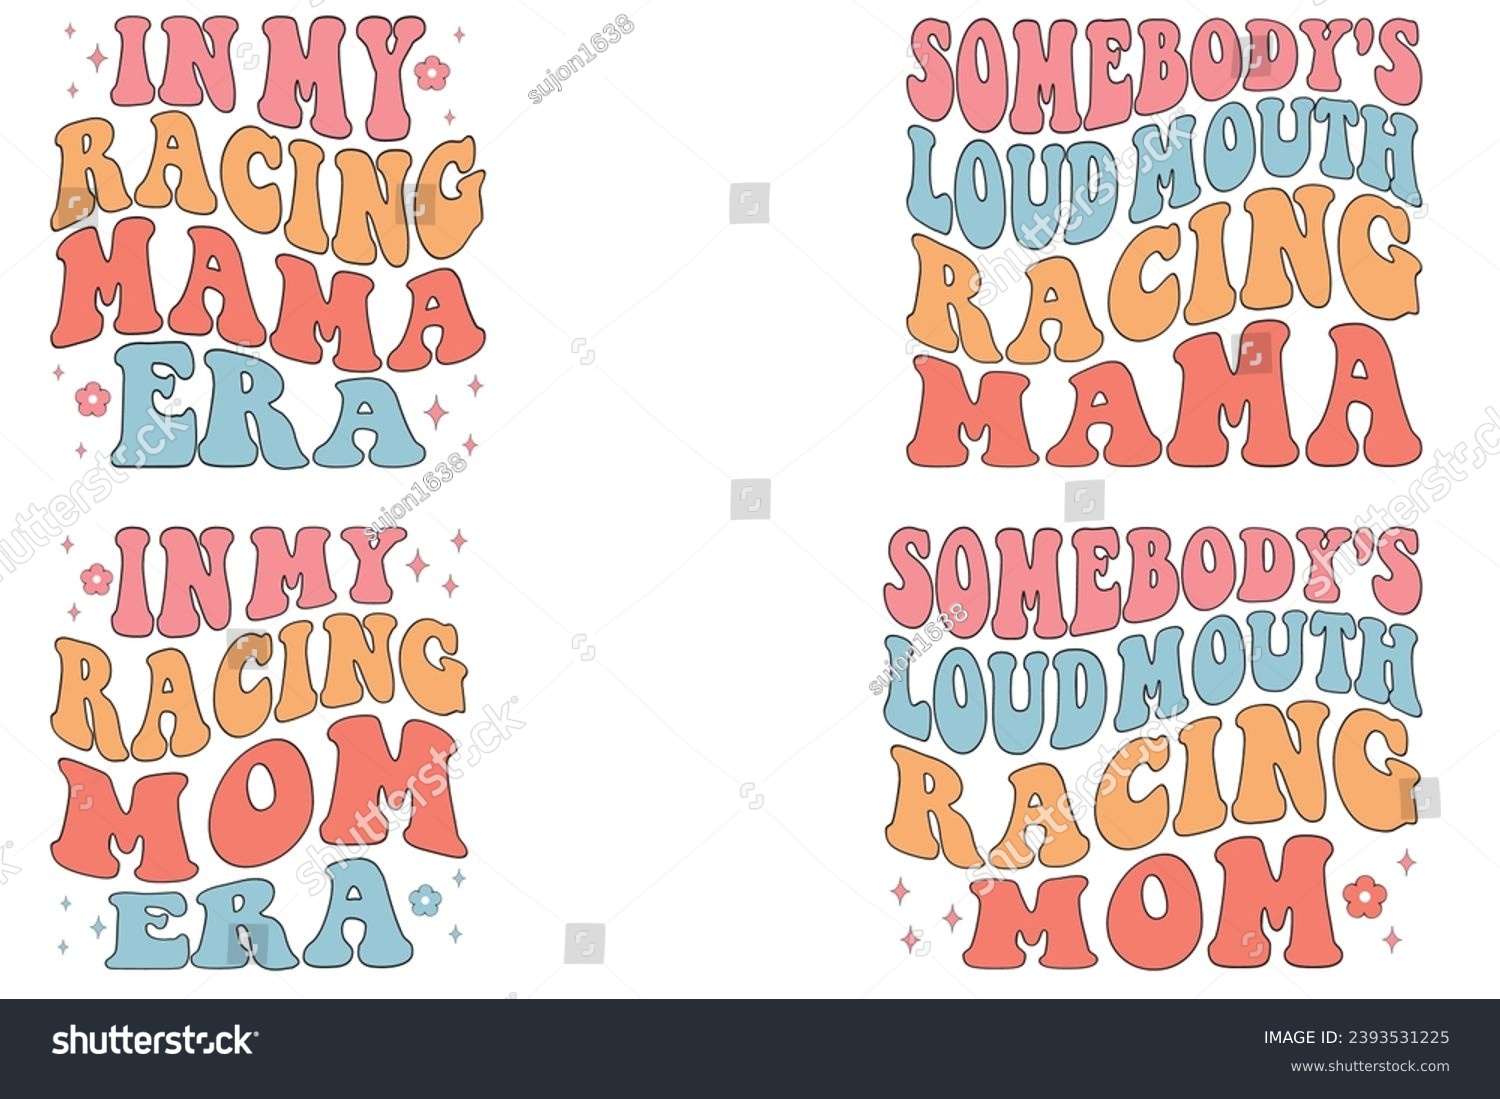 SVG of In My Racing Mama Era, Somebody's Loud MOUTH Racing mama, In My Racing Mom Era, Somebody's Loud MOUTH Racing mom retro wavy T-shirt svg